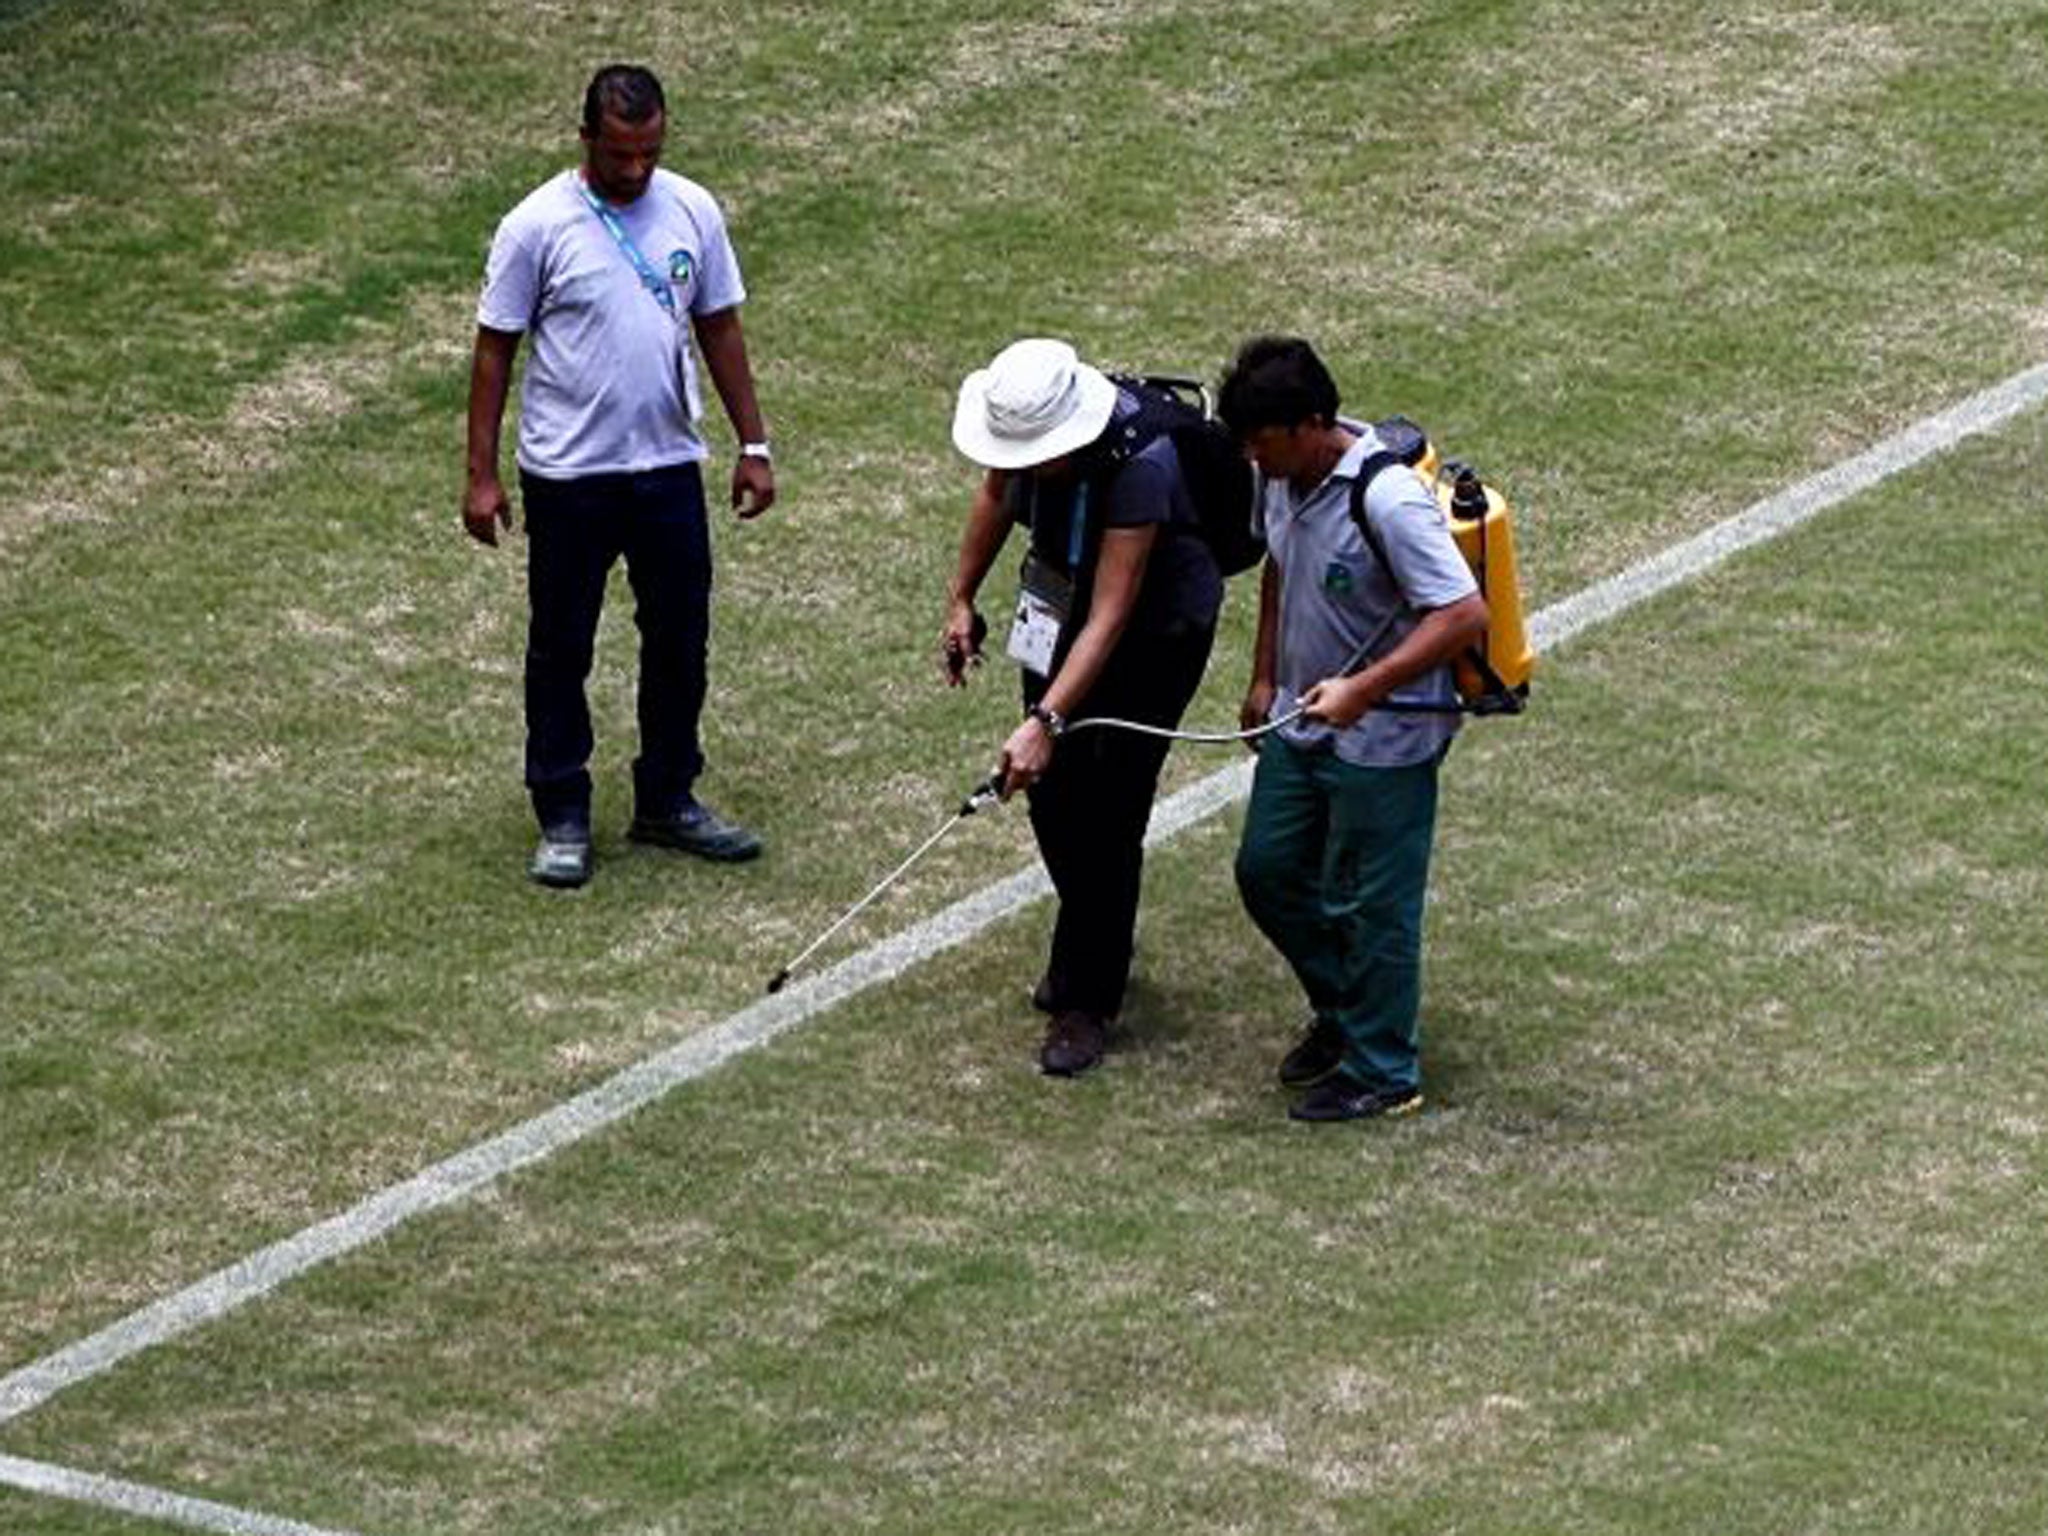 The state of the Arena Amazonia pitch is still a cause for concern